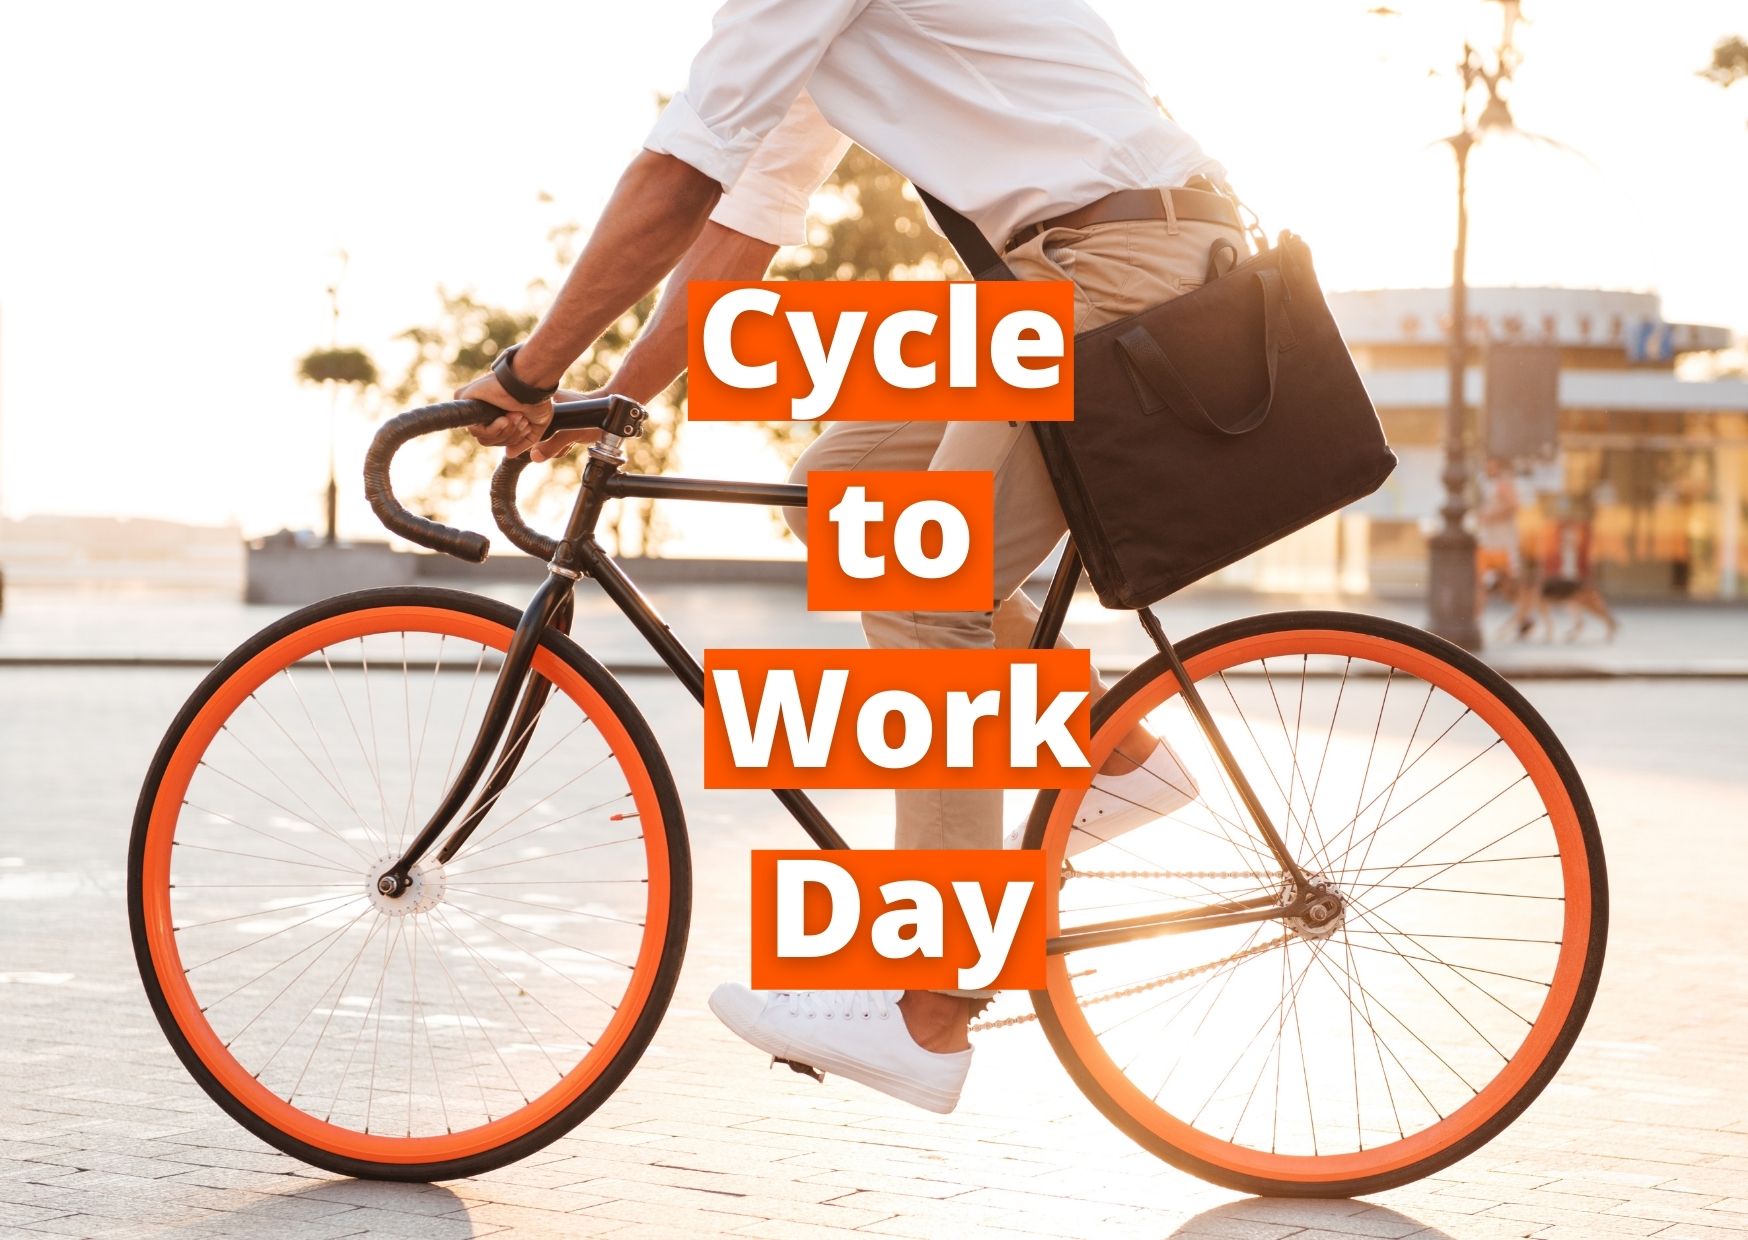 Cycle to work day